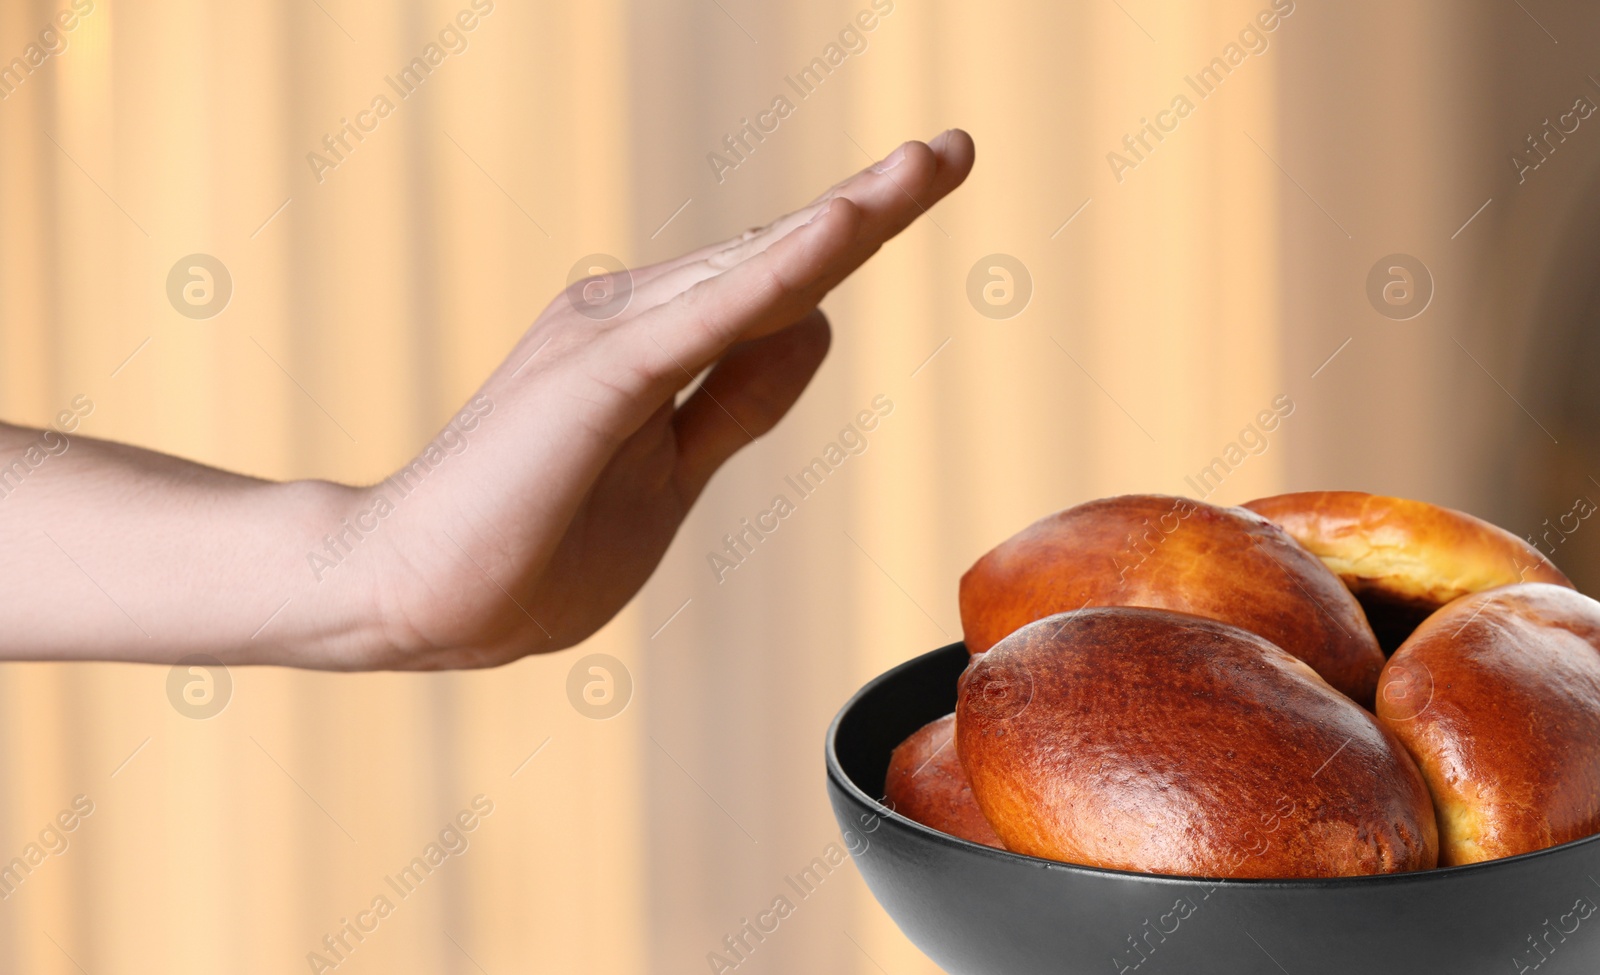 Image of Gluten free diet. Man refusing from pastry at home, closeup